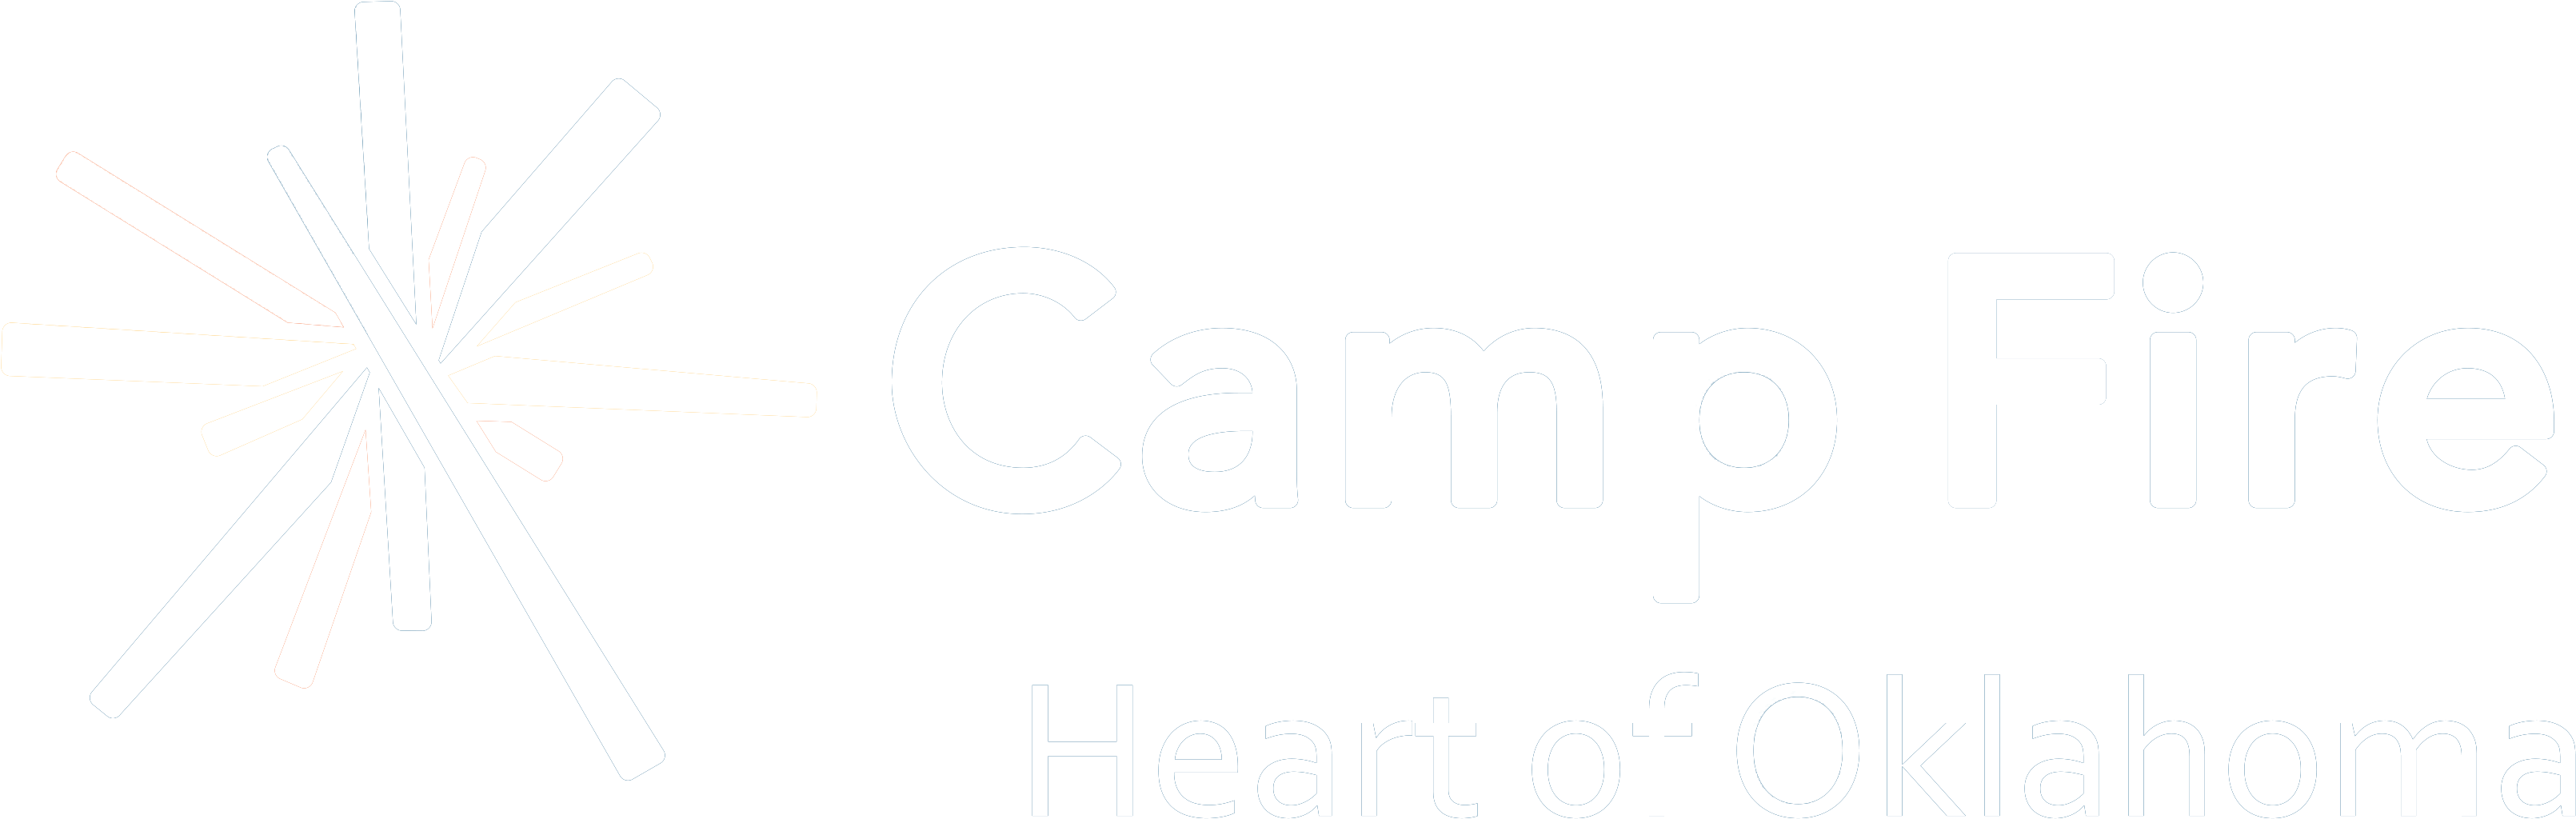 In Camp Fire, It Begins Now - Fire (3327x1164), Png Download